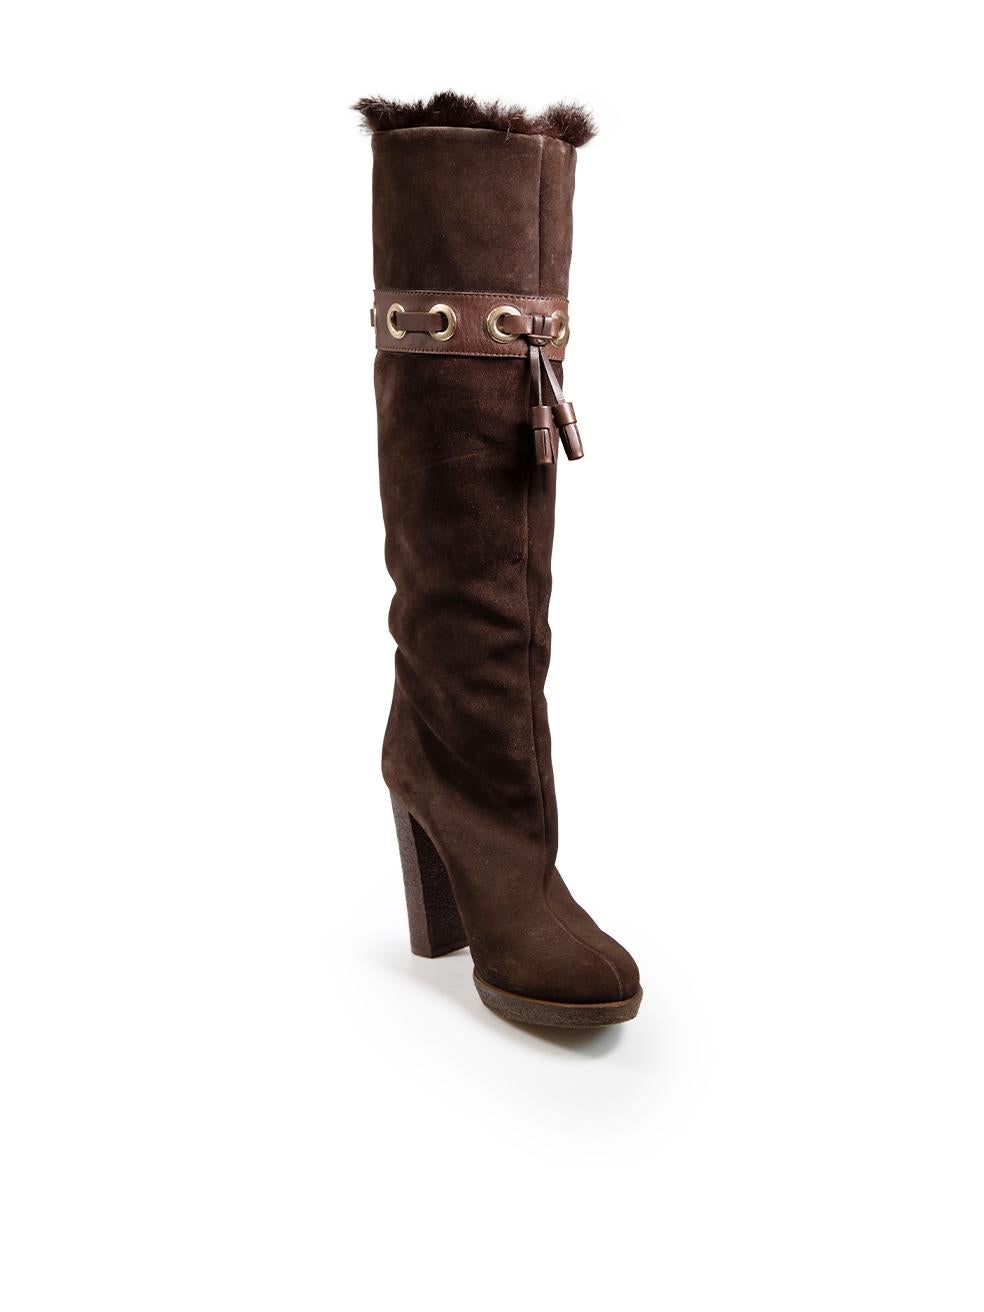 CONDITION is Good. Minor wear to boots is evident. Light wear to outer suede throughout boots, tarnishing to metal eyelets and general wear to soles on this used Gucci designer resale item.
 
 
 
 Details
 
 
 Brown
 
 Suede
 
 Boots
 
 Knee high
 
